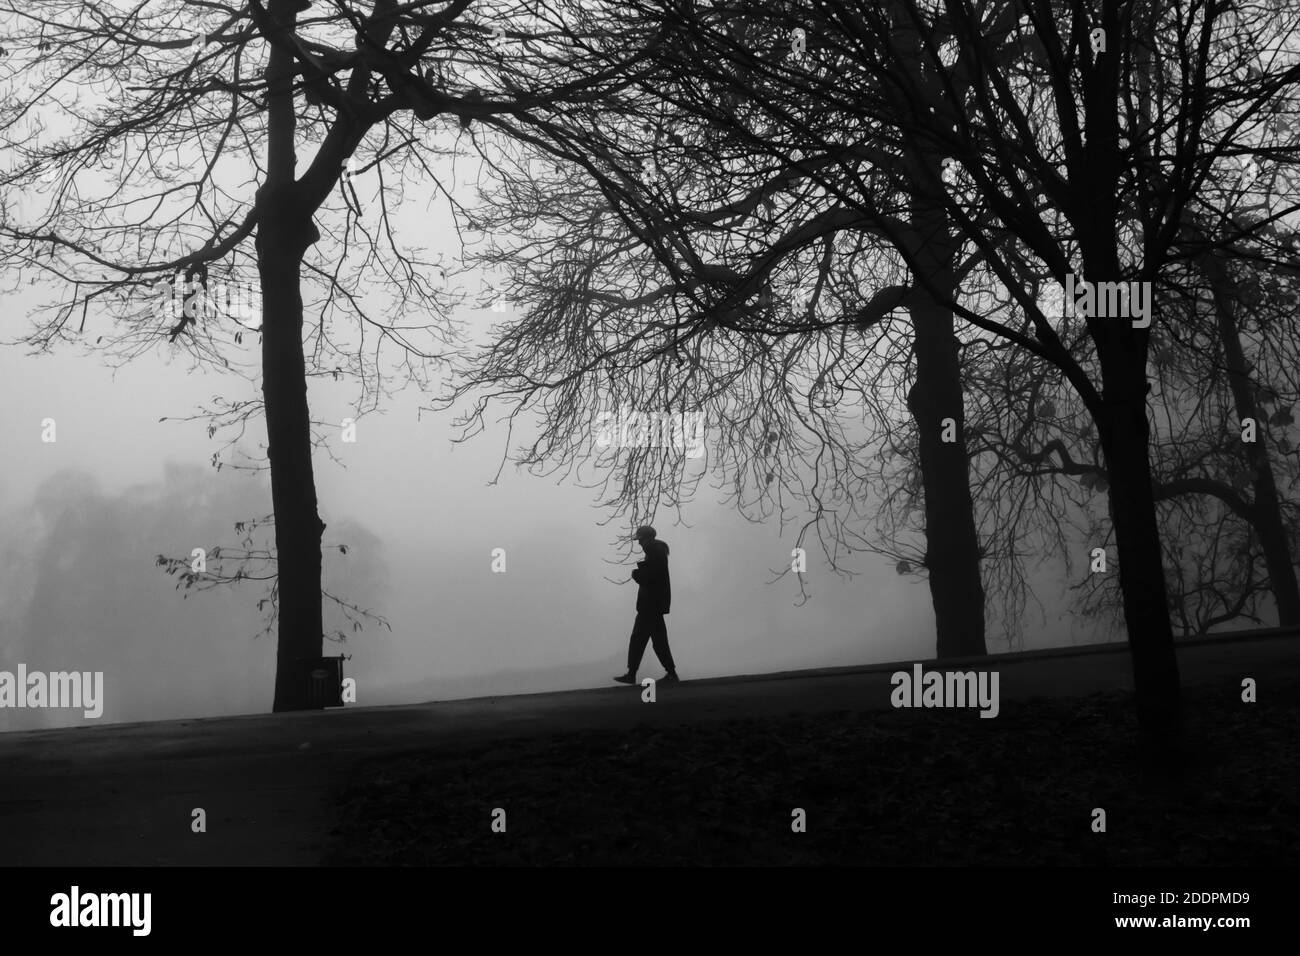 Glasgow, Scotland, UK. 26th November, 2020. UK Weather: Silhouettes in Queen's Park on a foggy morning. Credit: Skully/Alamy Live News Stock Photo